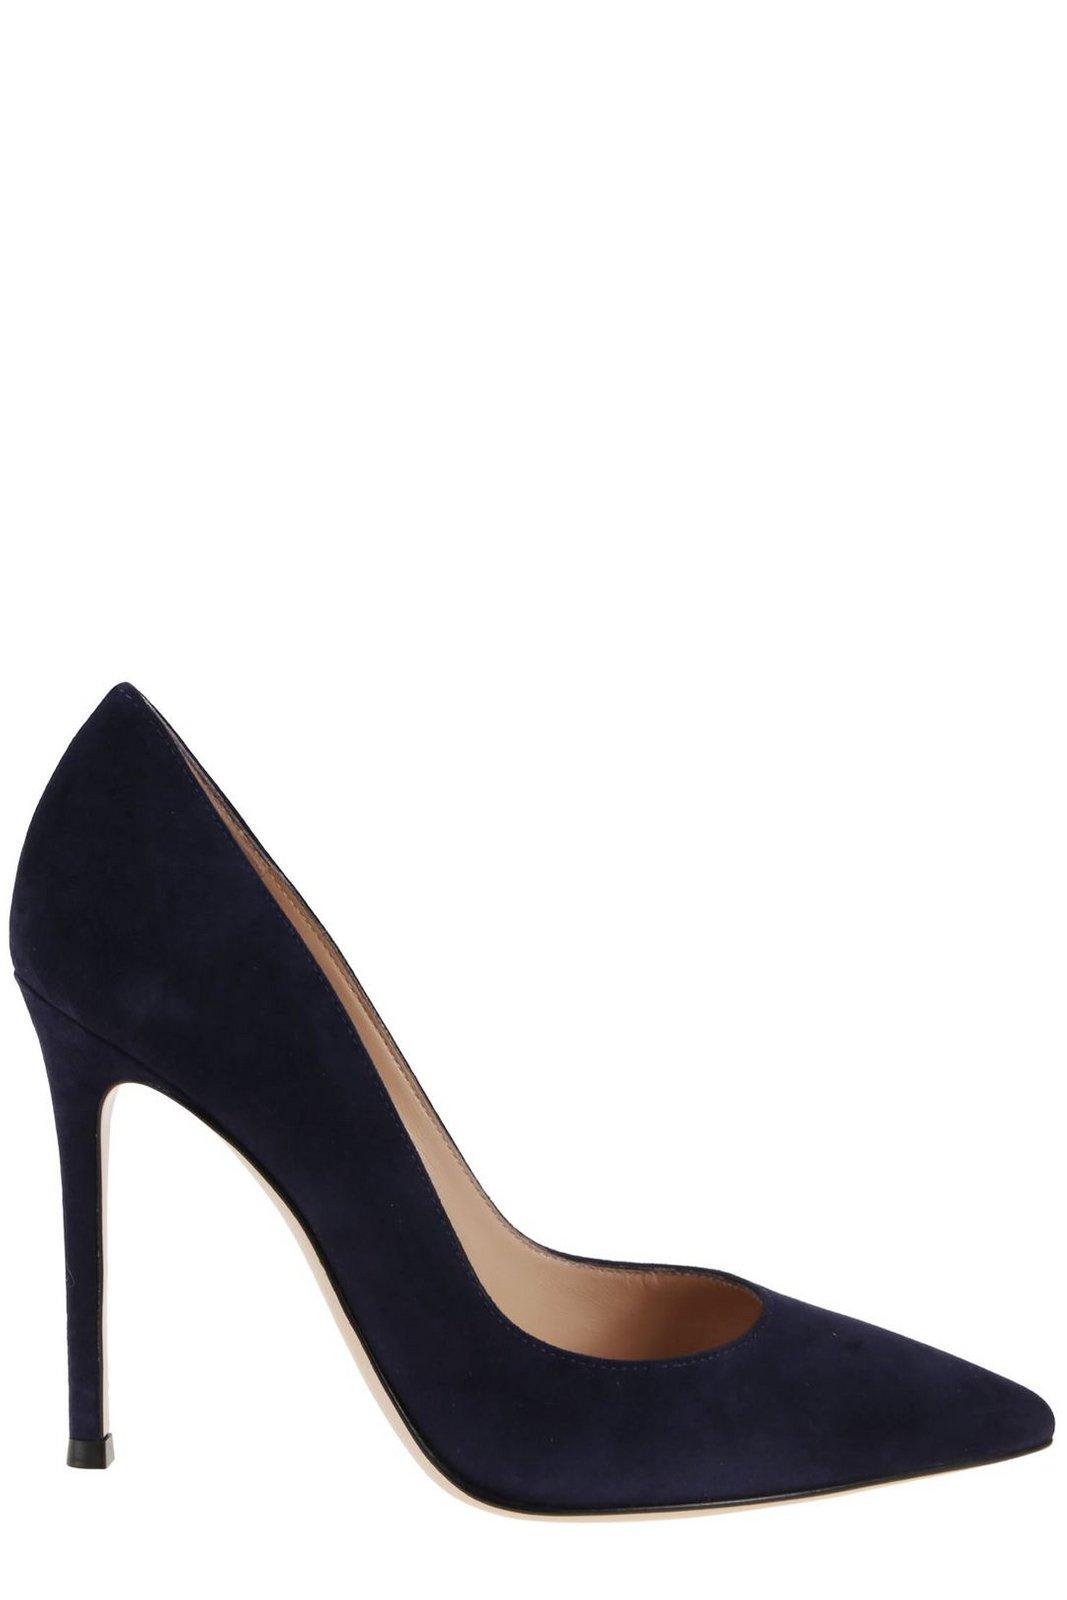 Gianvito Rossi Pointed Toe Pumps In Blue